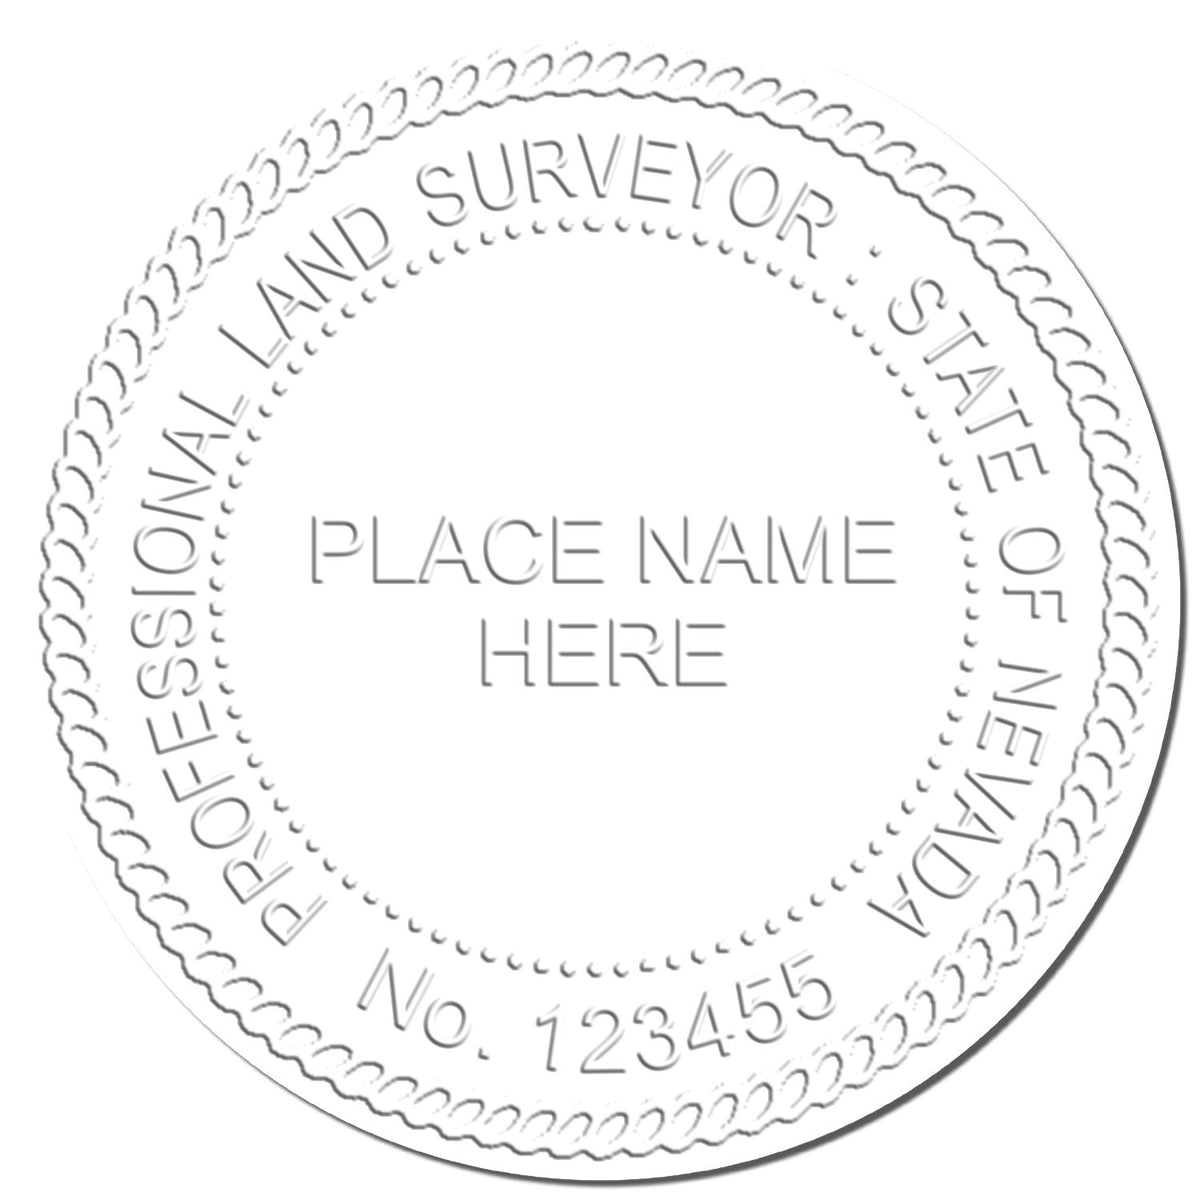 This paper is stamped with a sample imprint of the Handheld Nevada Land Surveyor Seal, signifying its quality and reliability.